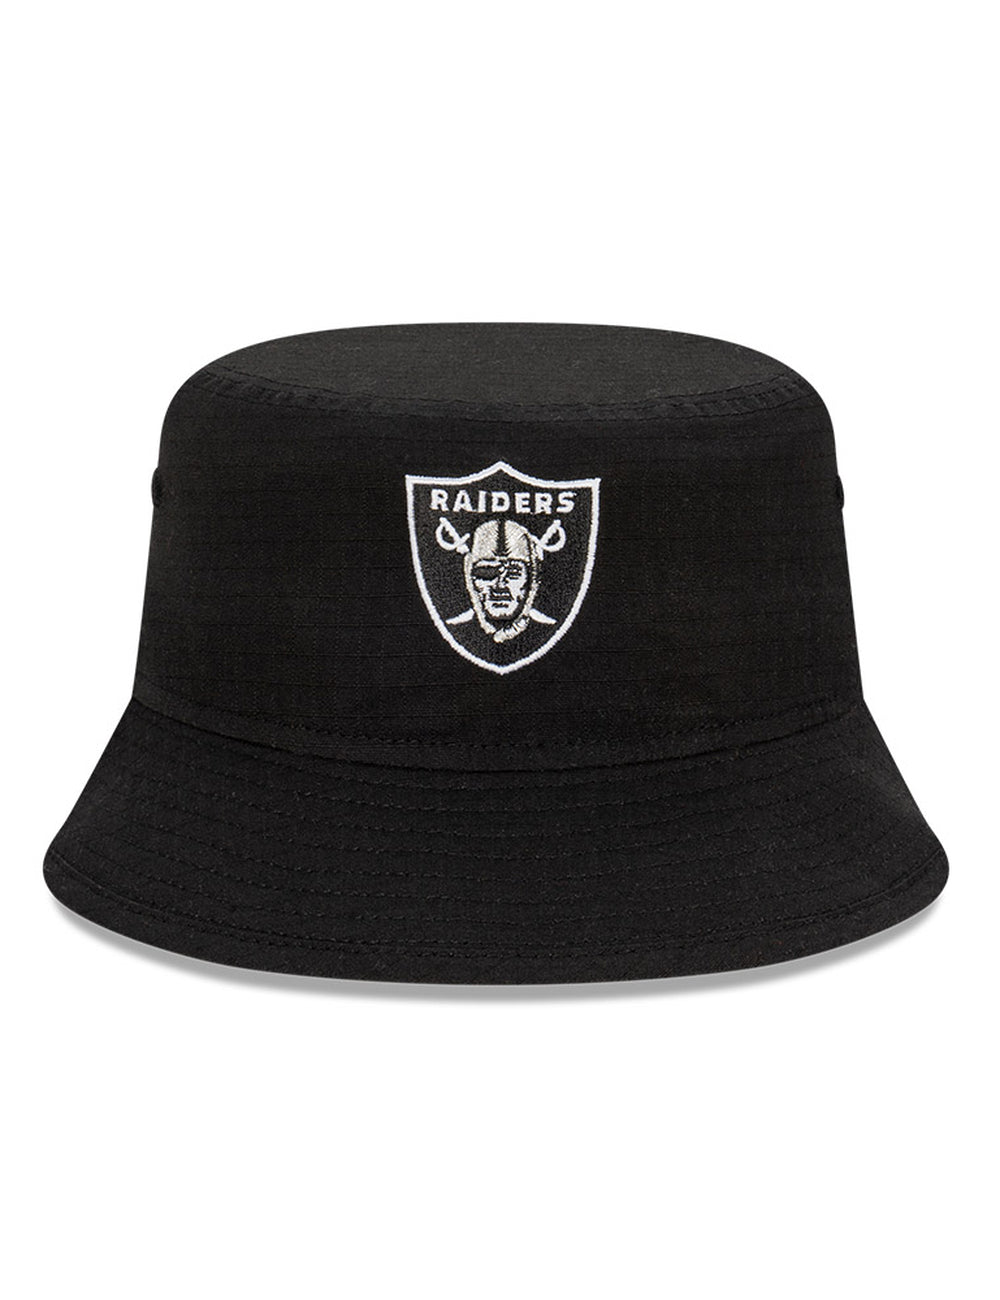 Las Vegas Raiders 2023 Draft Alt 59FIFTY Fitted Hat, Black - Size: 7, NFL by New Era